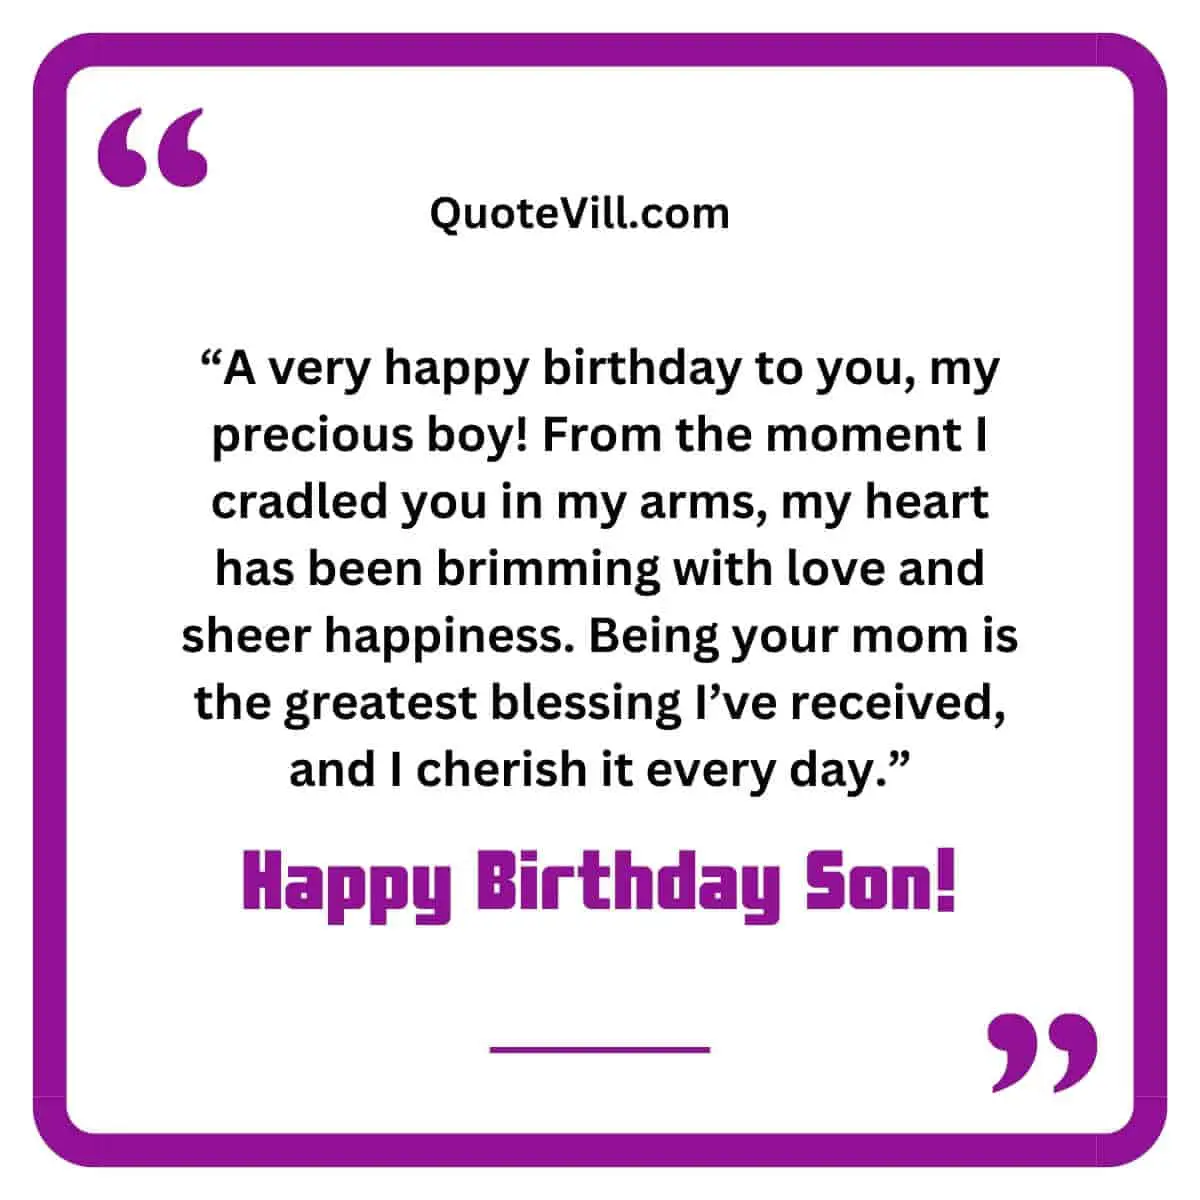 Emotional Birthday Wishes for Son from Mom